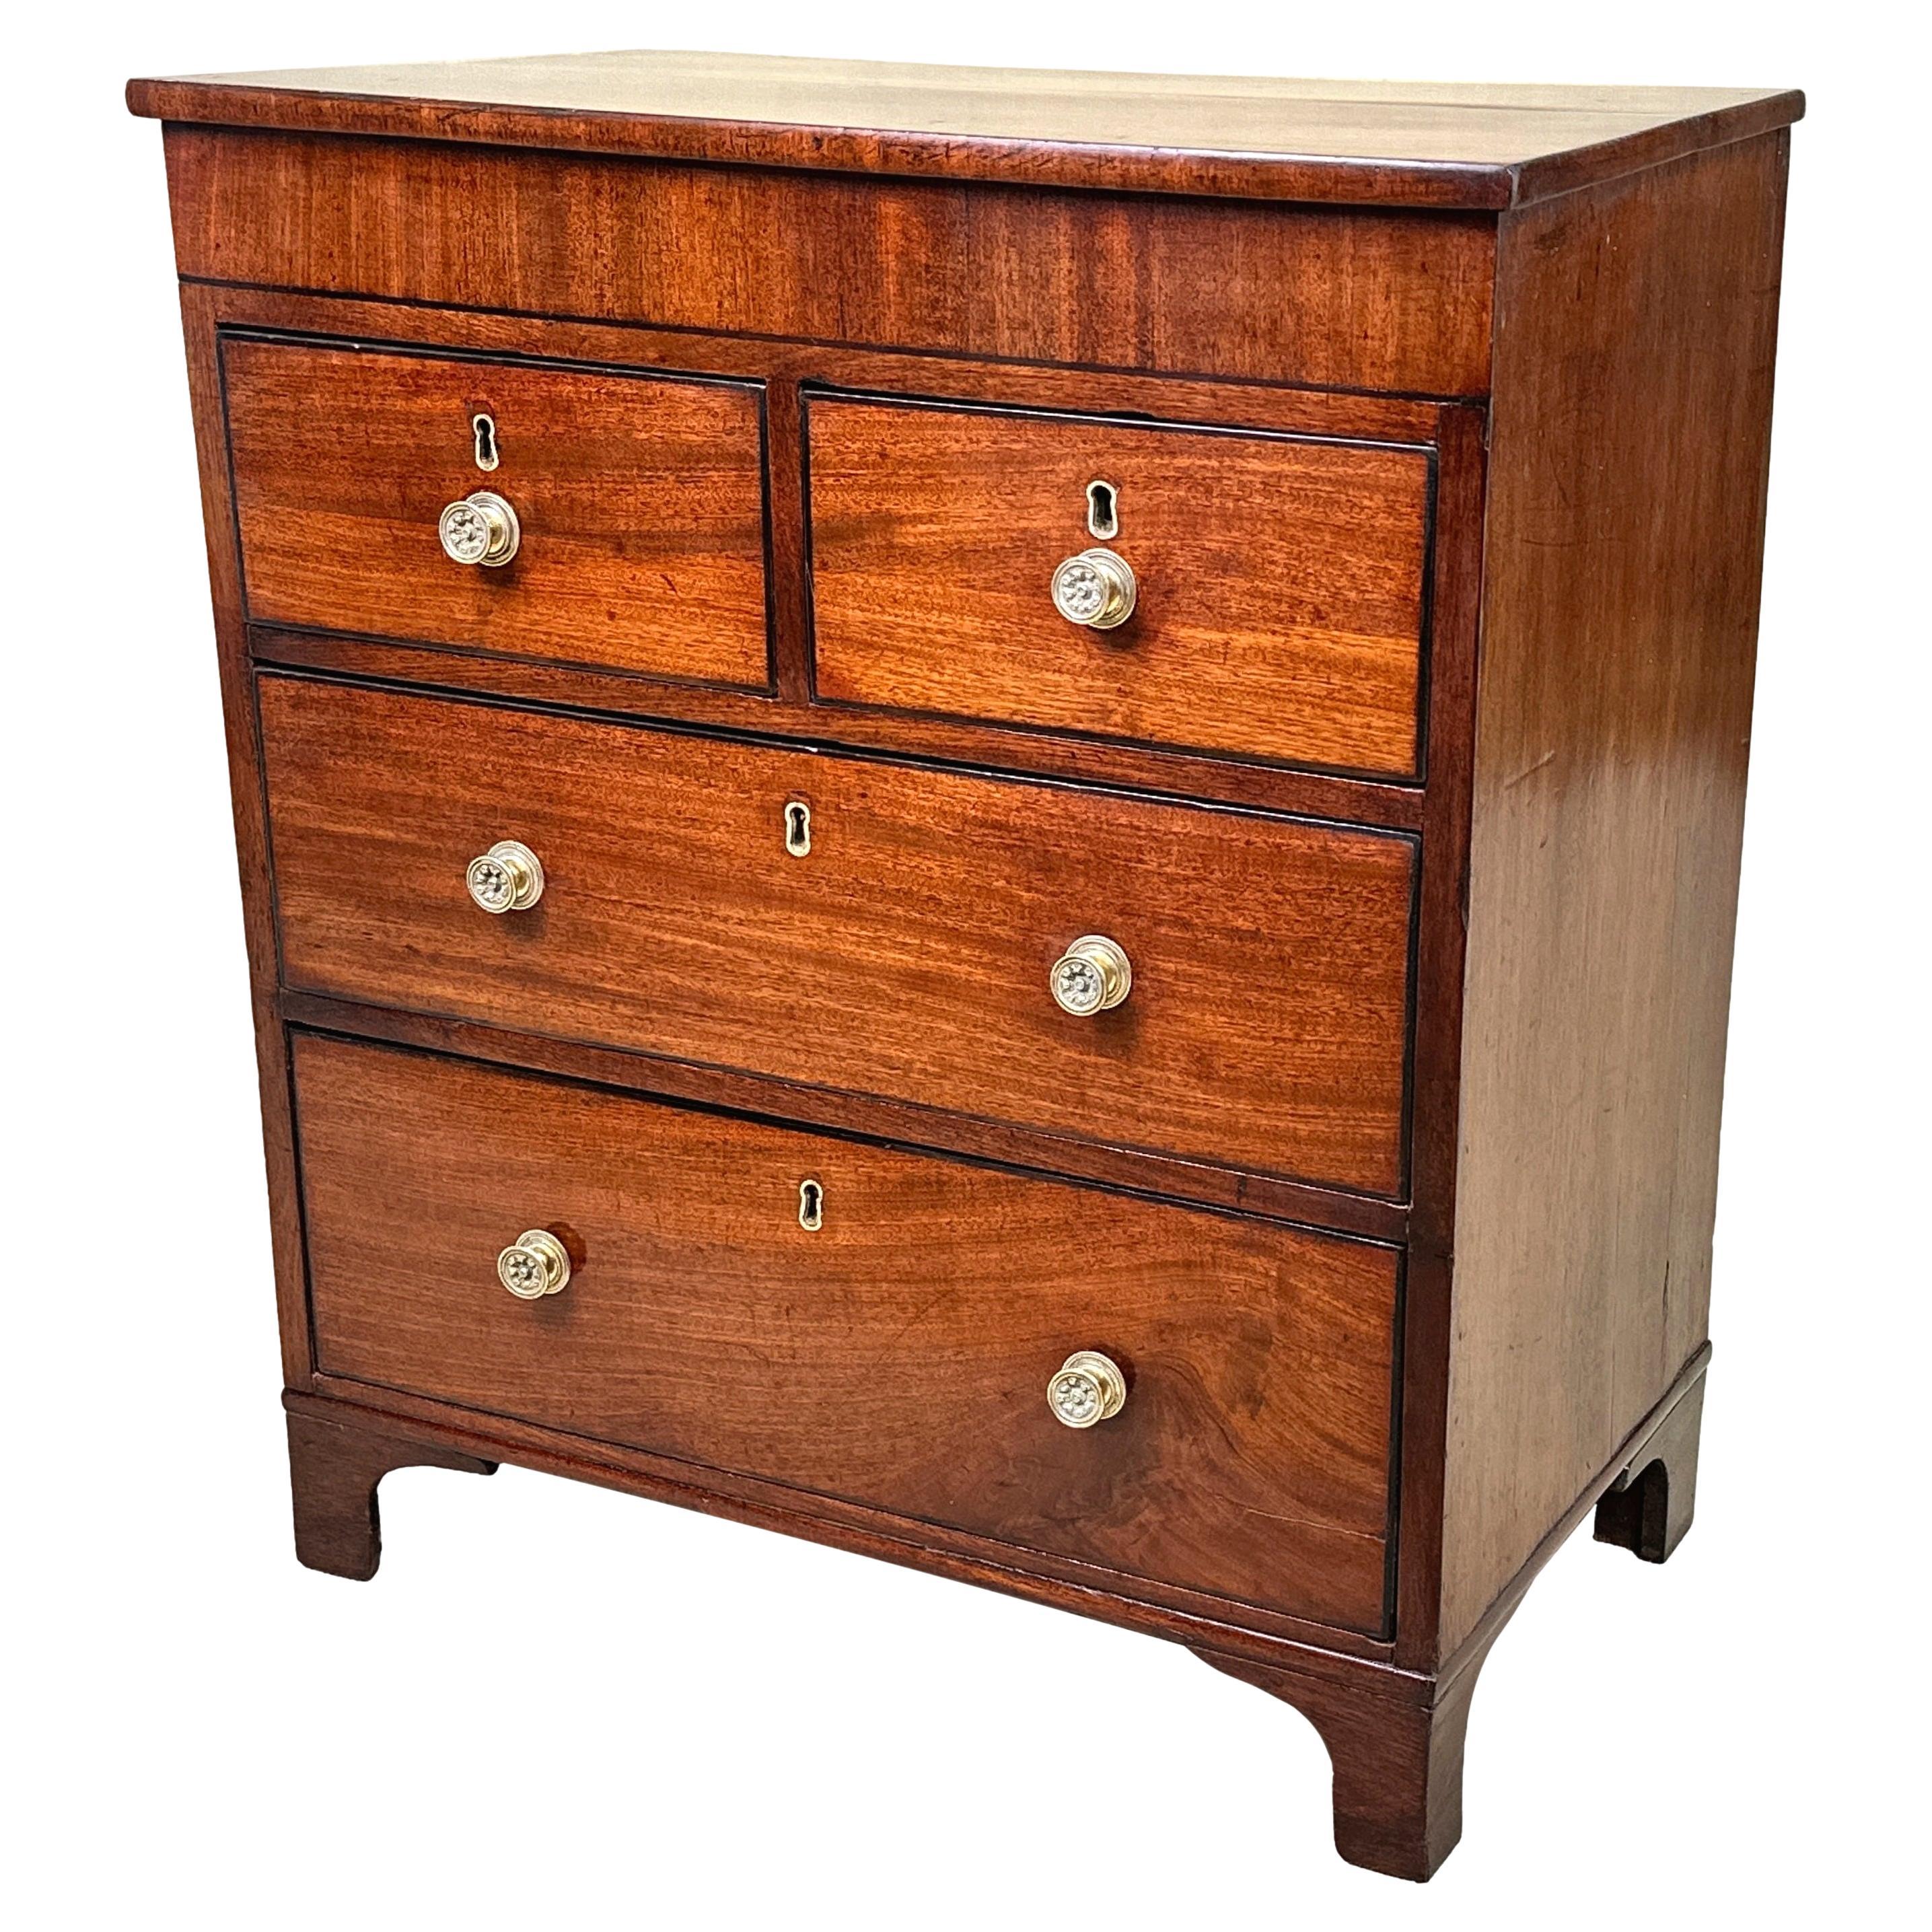 Georgian Mahogany Childs Chest Of Drawers For Sale